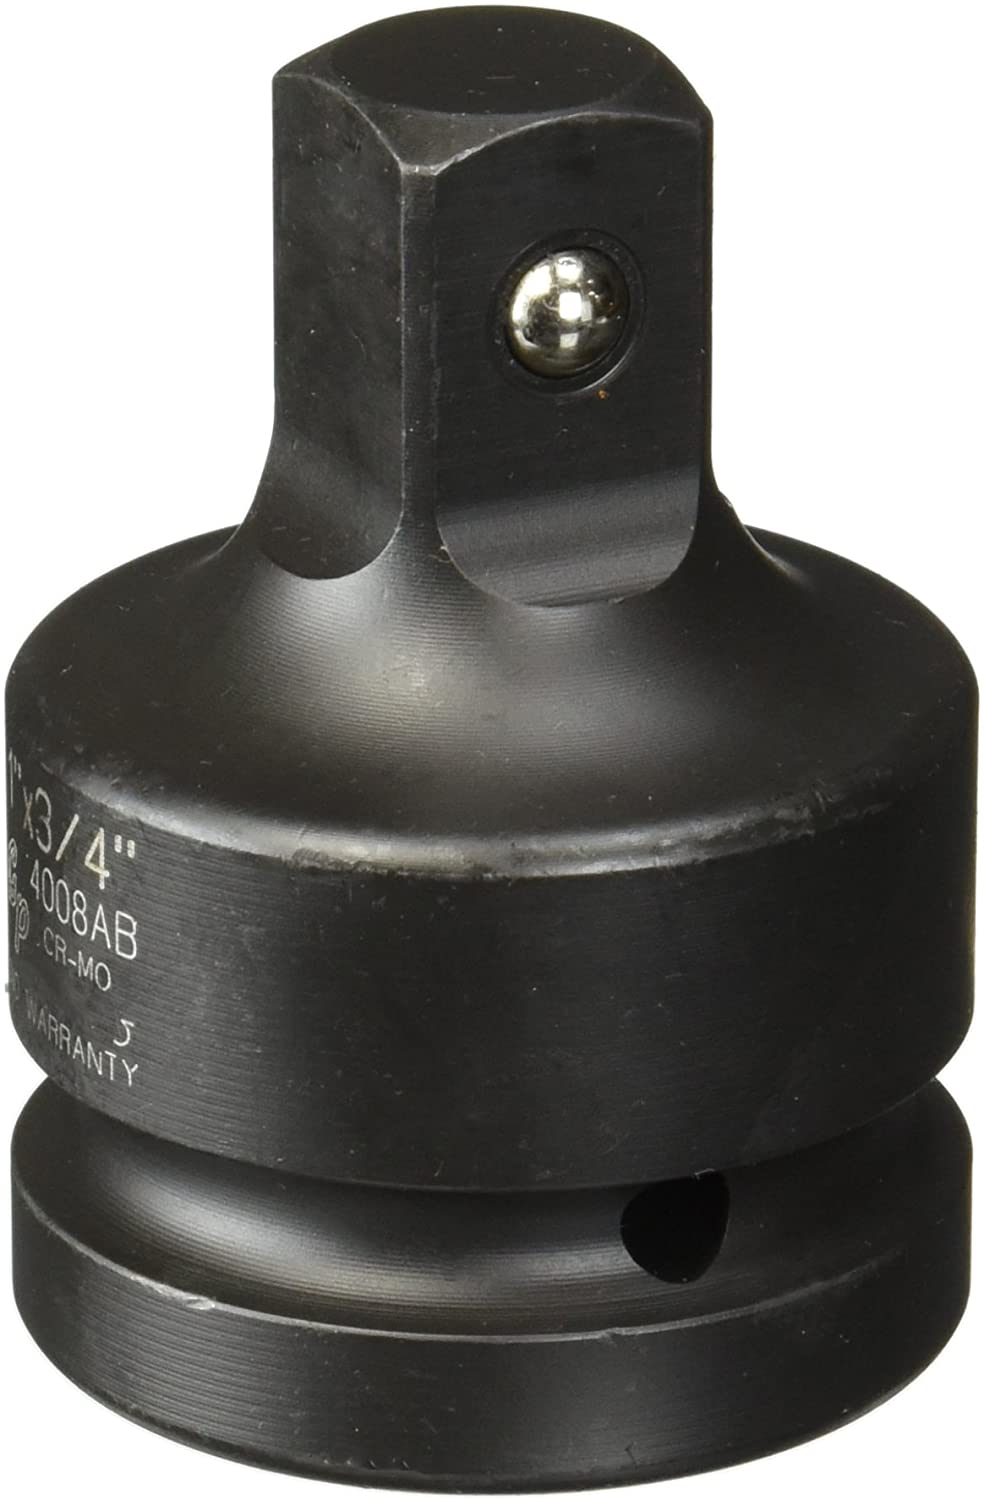 Grey Pneumatic 4008AB 1" Drive 3/4" Impact Adapter with Friction Ball